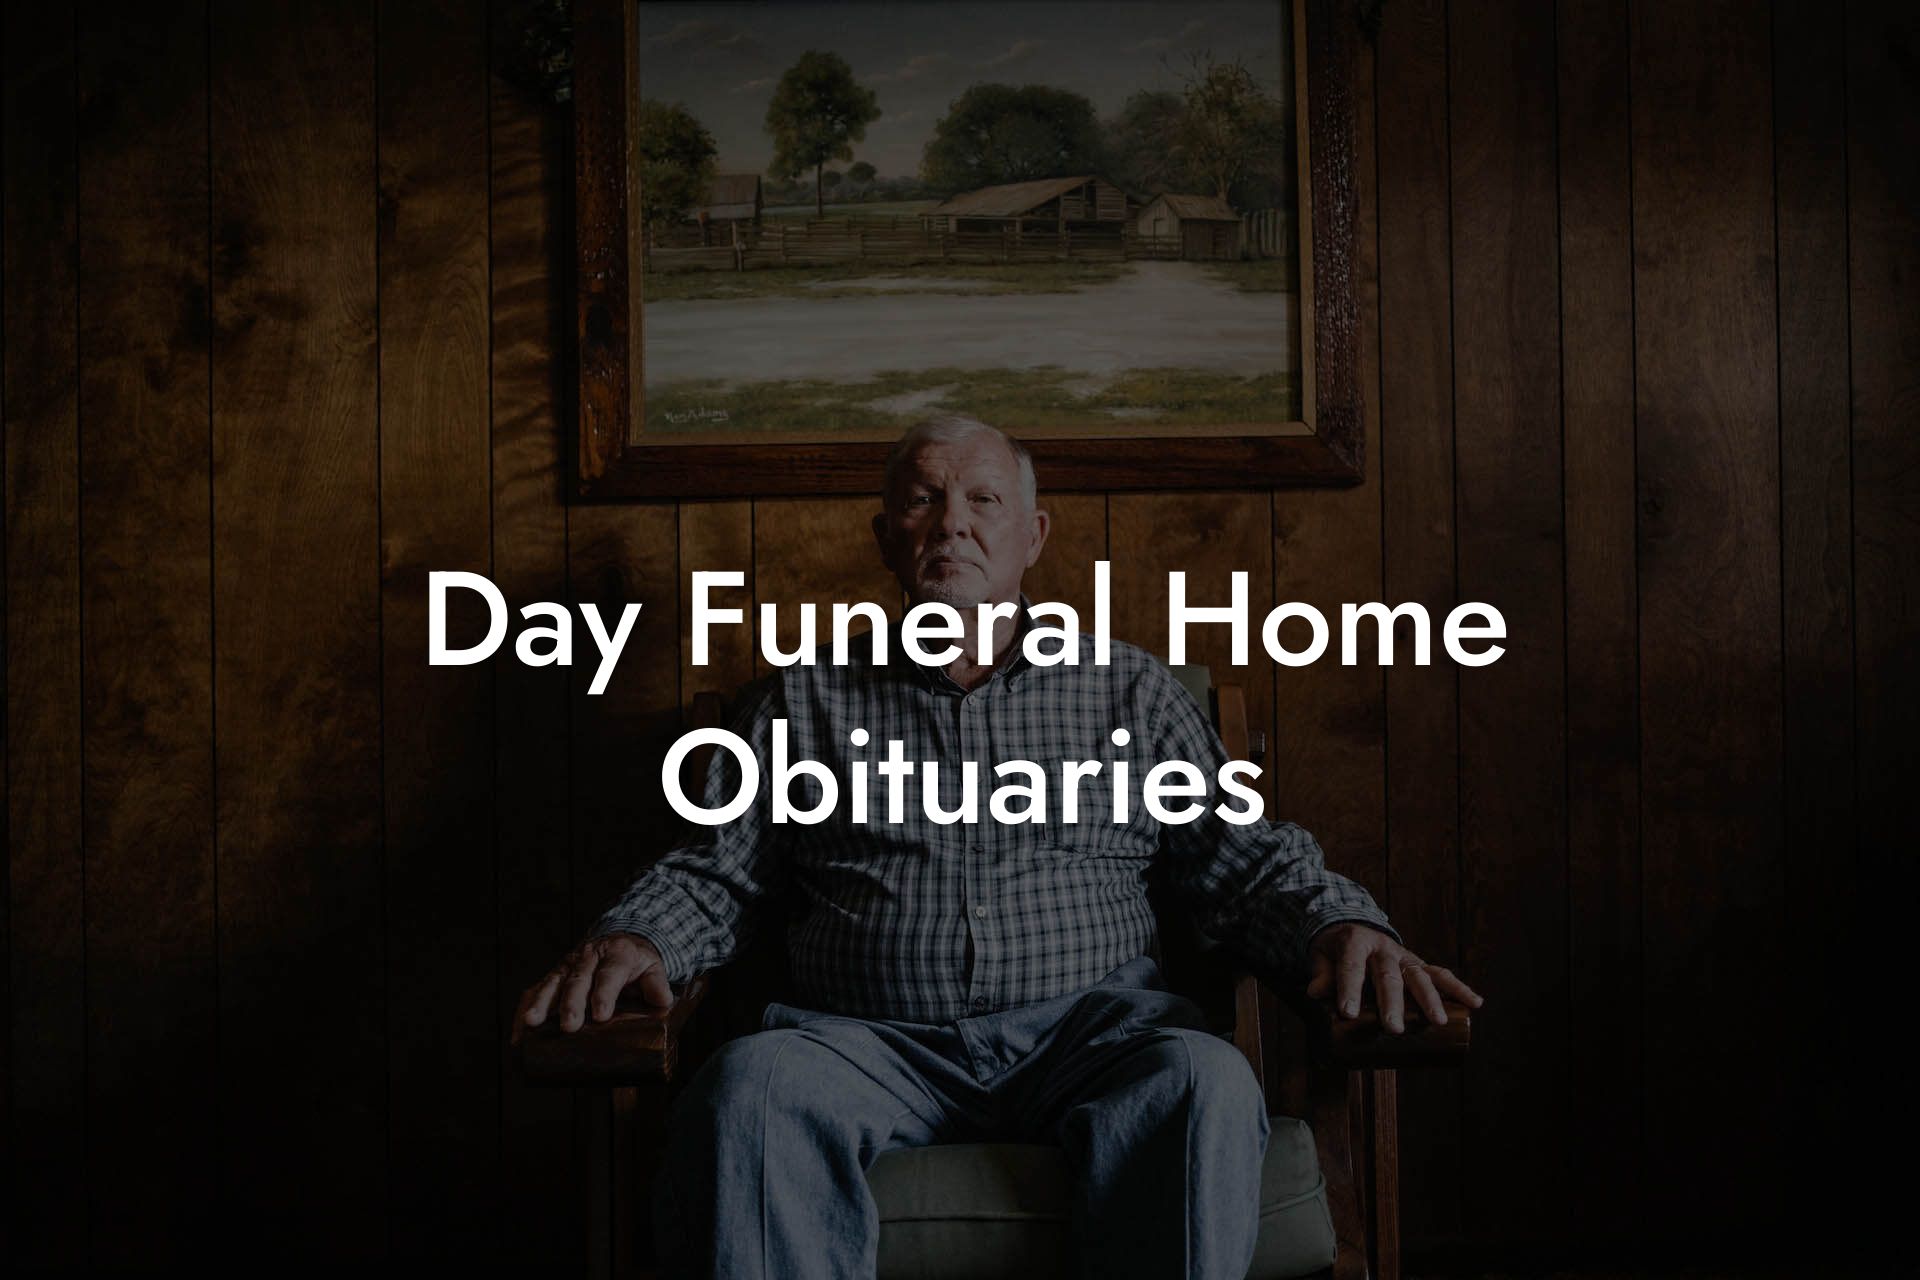 Day Funeral Home Obituaries